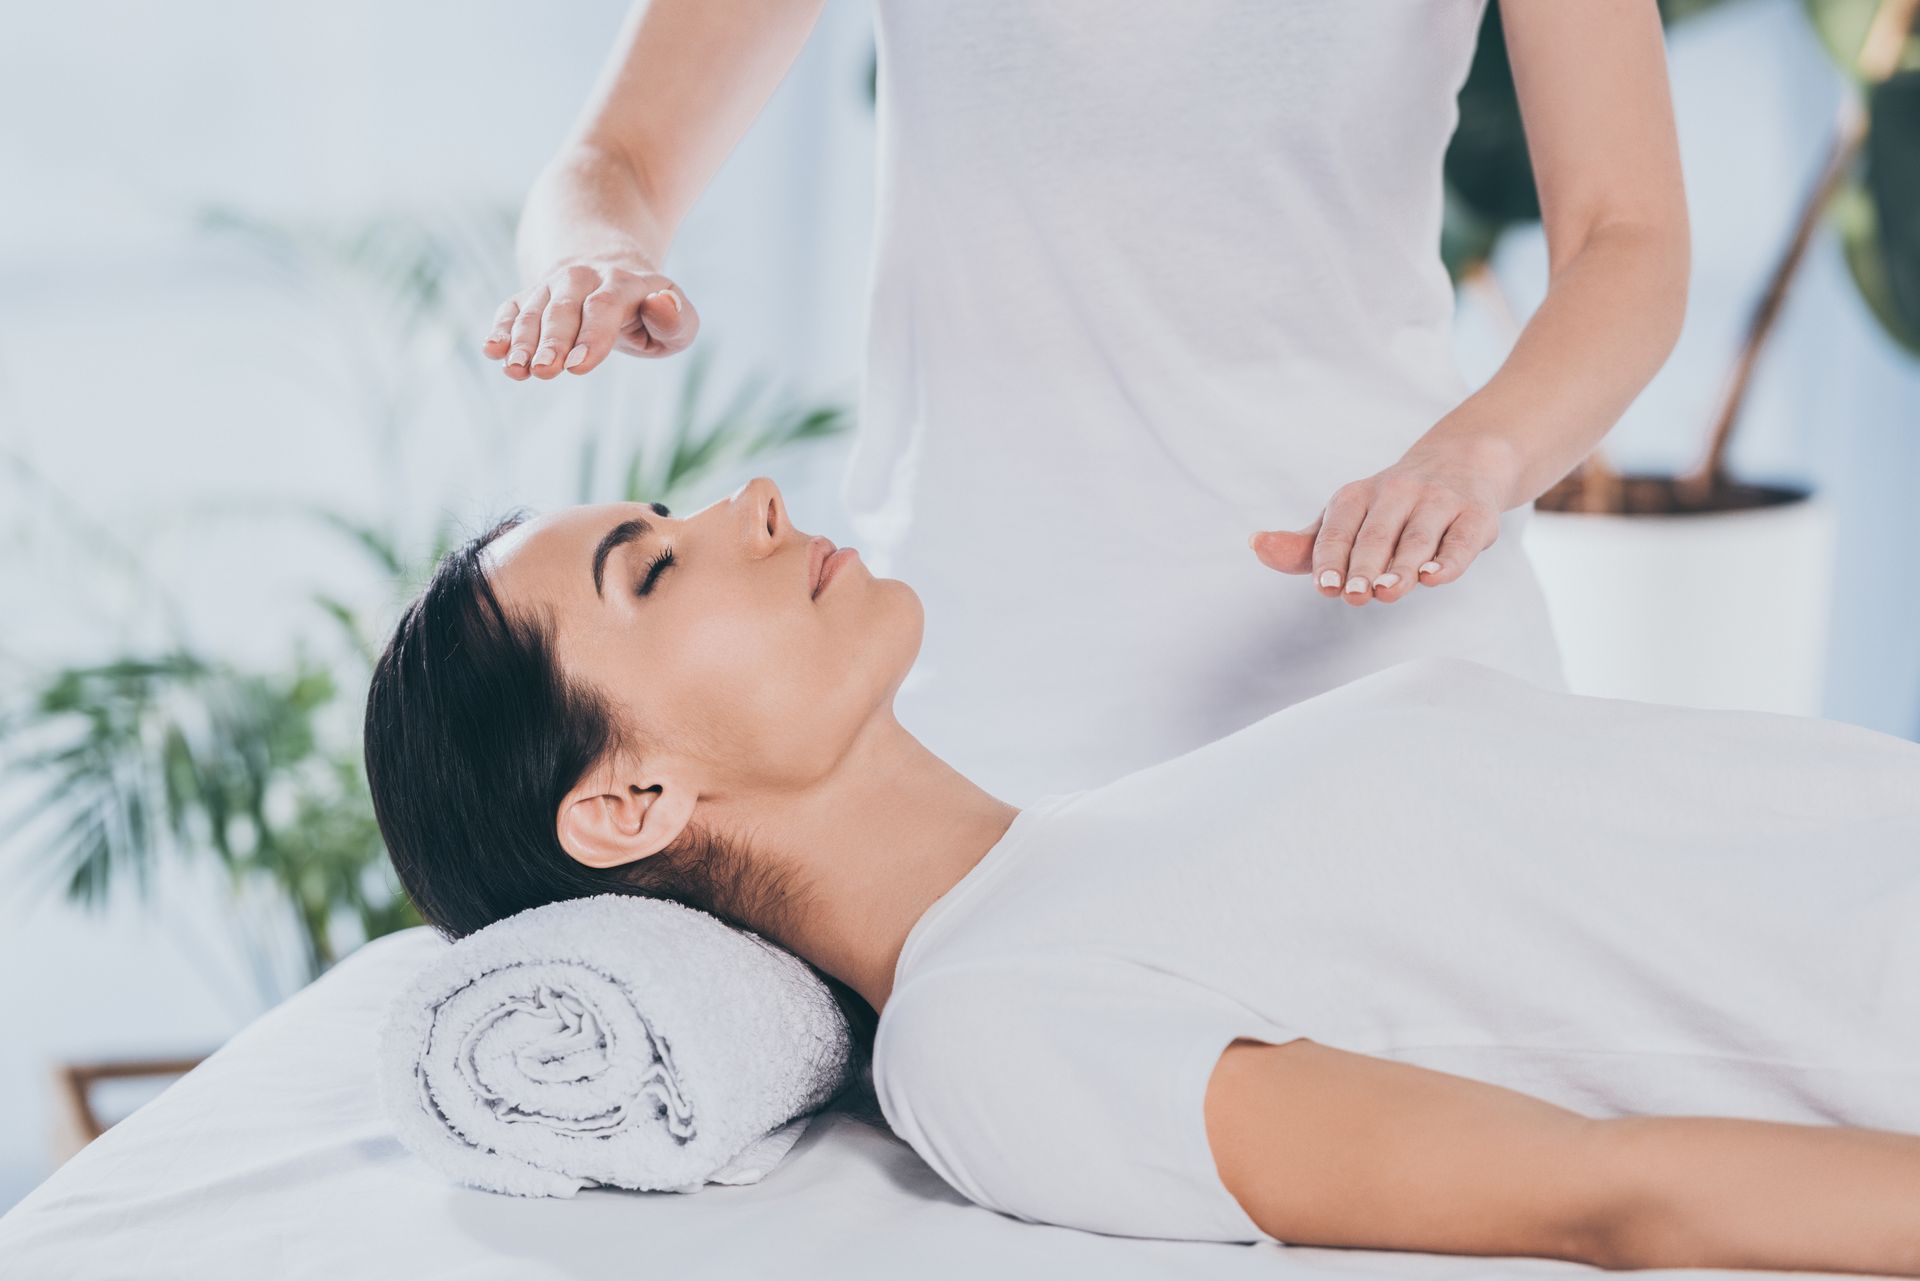 A woman is getting a reiki treatment at a spa.